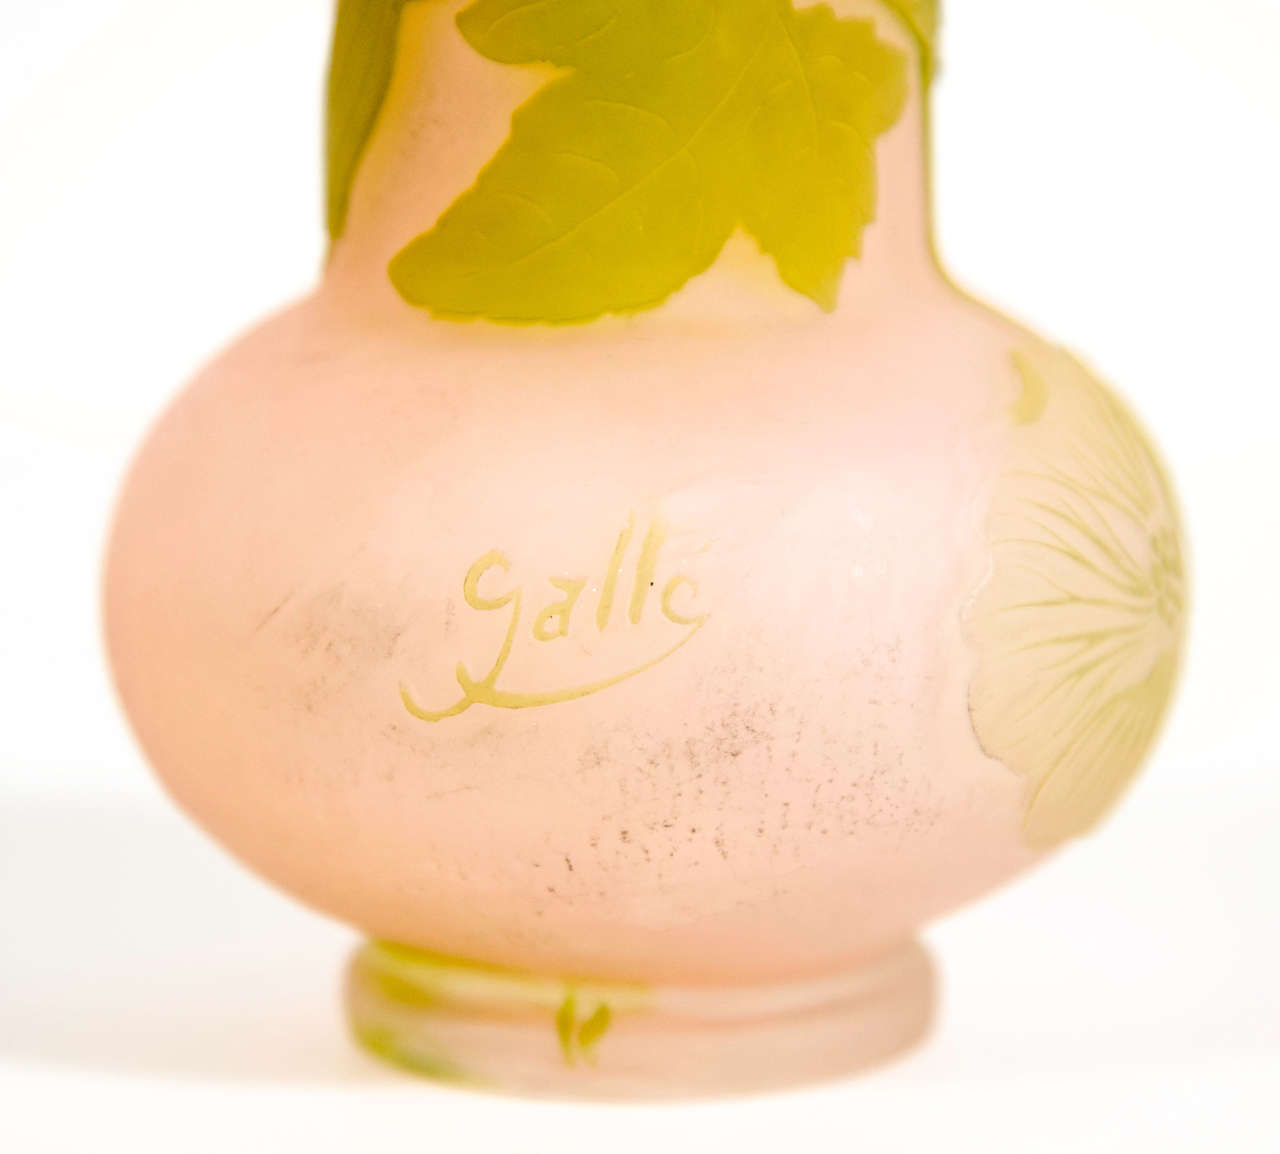 20th Century Art Nouveau Pale Pink & Green Etched Glass Cameo Vase signed by Galle